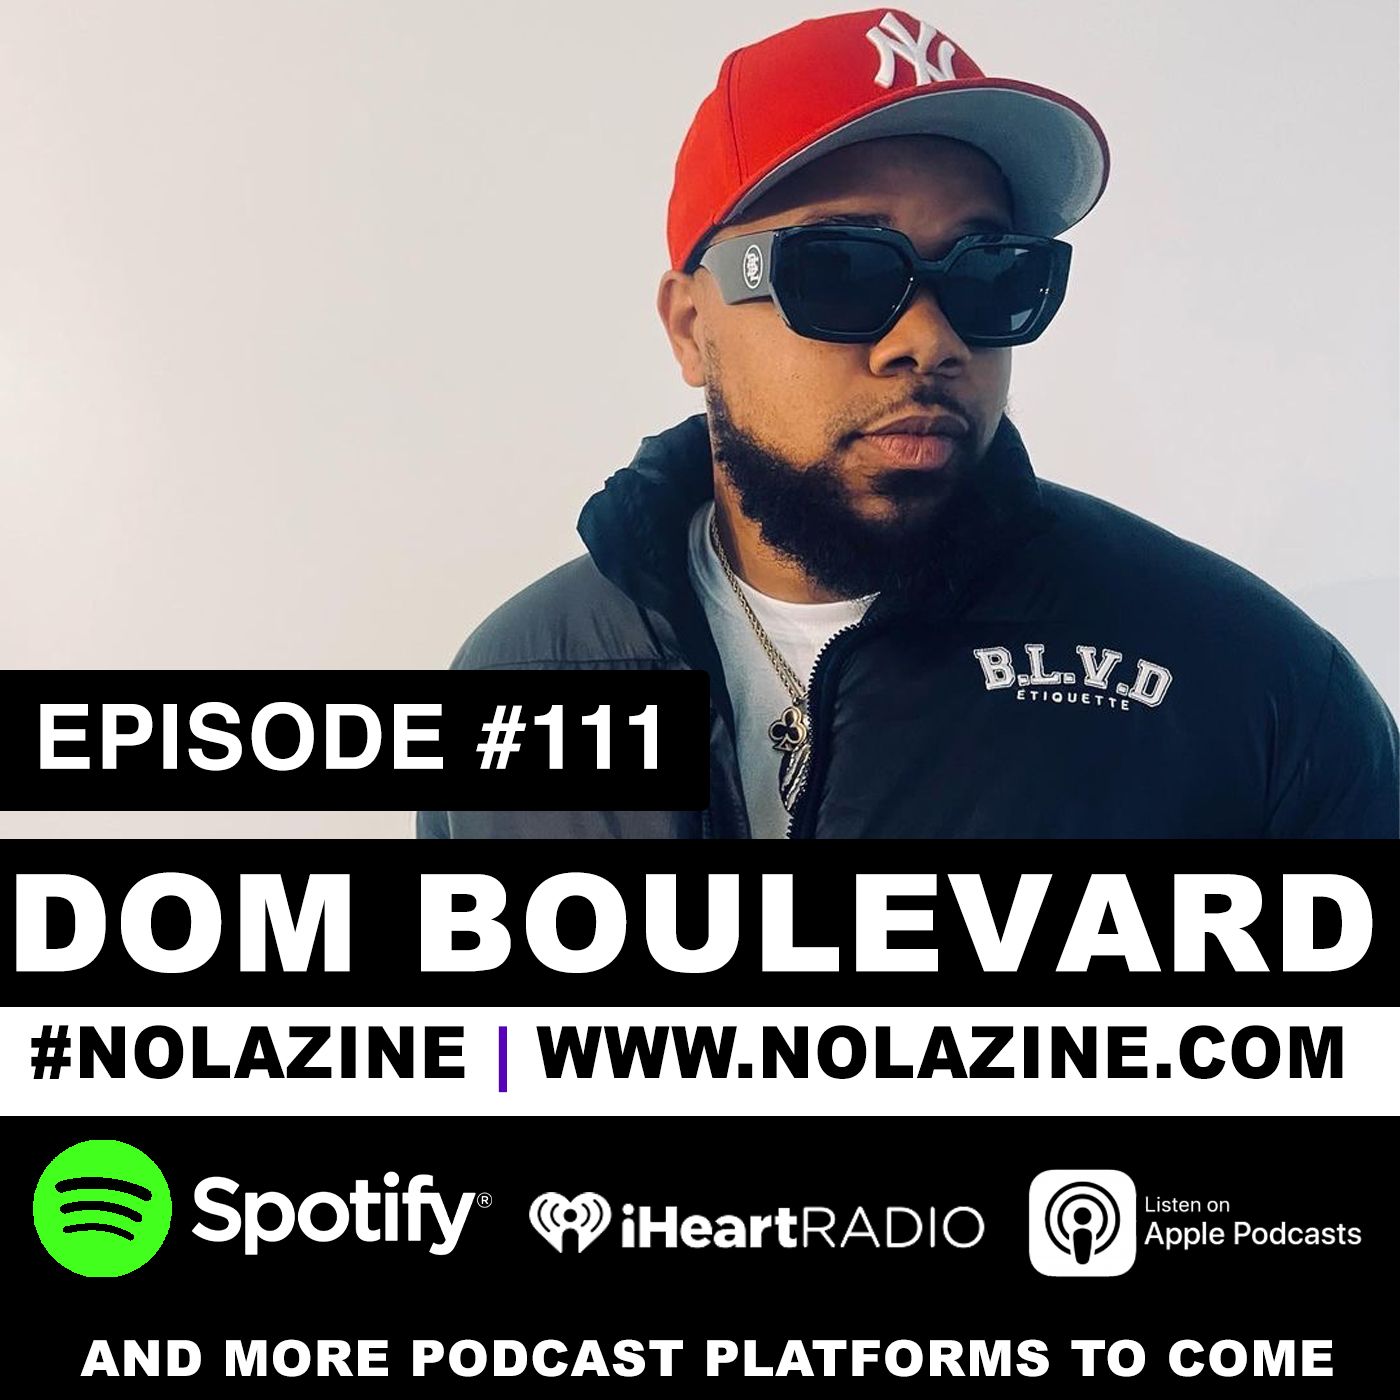 EP: 111 Featuring Dom Boulevard